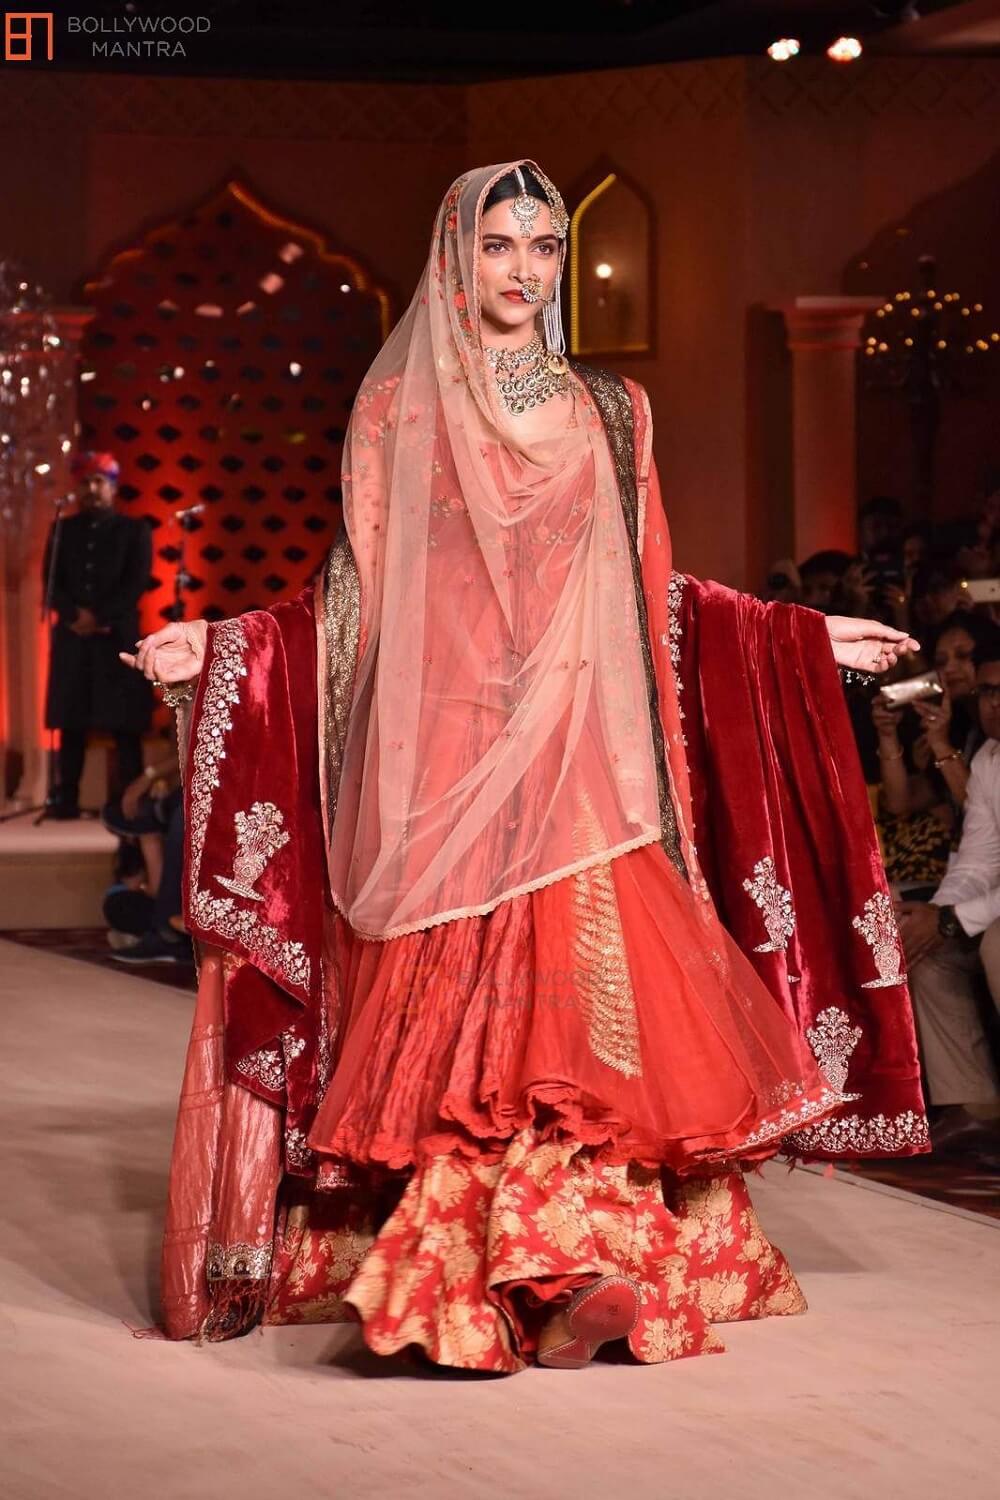 Thanks Bollywood For Giving Us Iconic Mughal Outfits That Are Ideal For Millennial Brides & Grooms